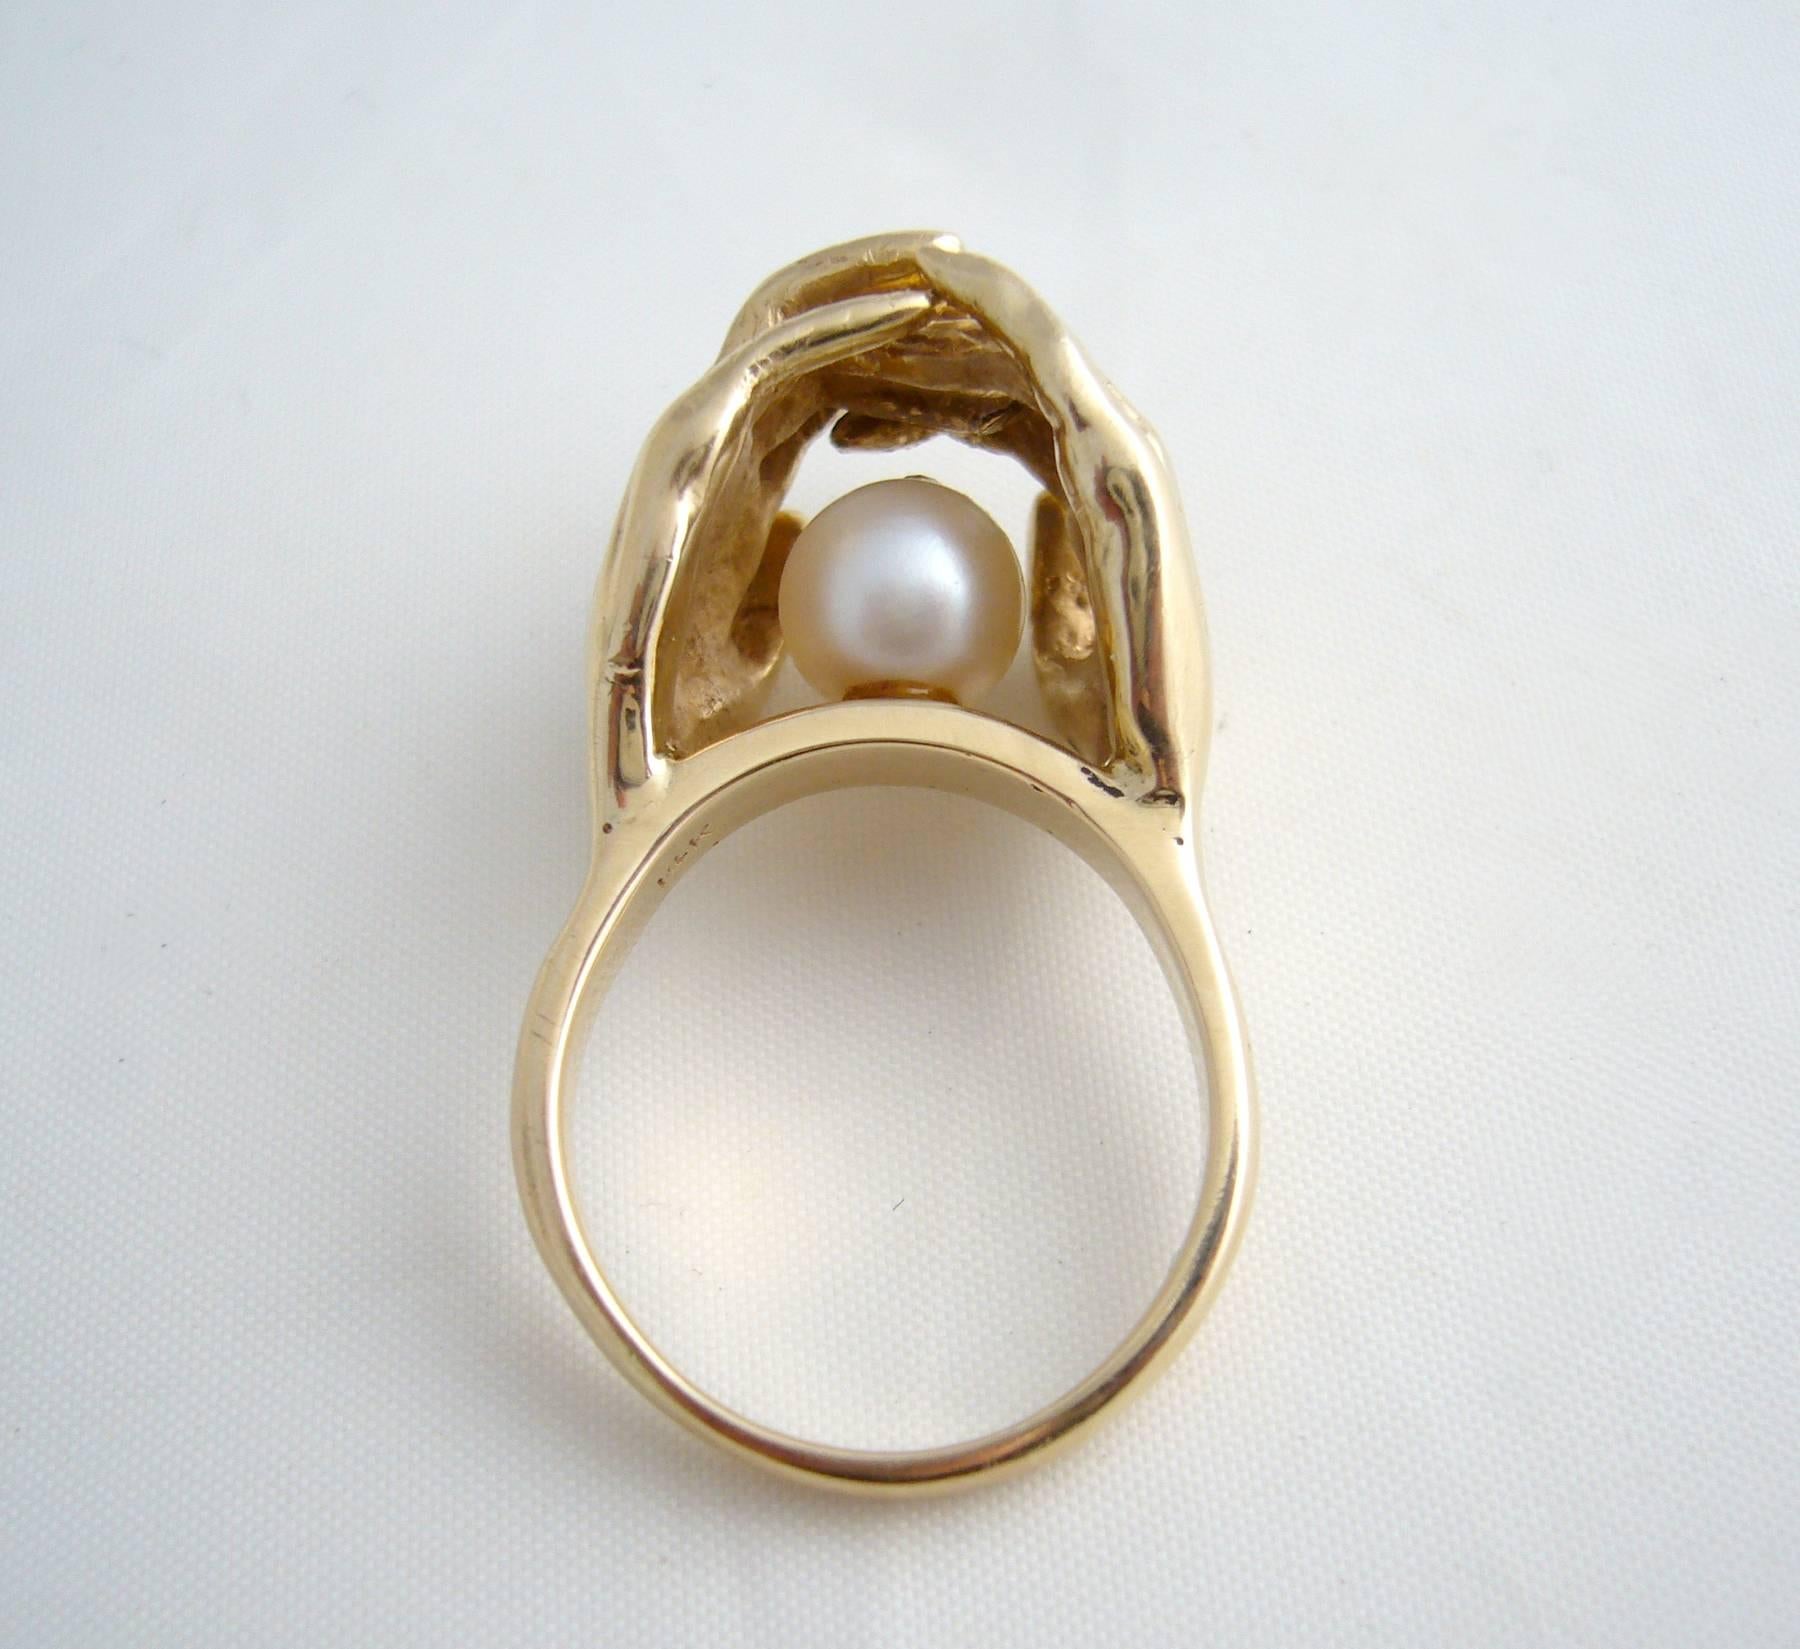 Gold and pearl surrealist ring depicting two very detailed hands holding a pearl, signifying love or deep friendship.  Ring is a finger size 7.5 and weighs 14.6 grams.  A cool, unconventional alternate to a modern day engagement or wedding ring.